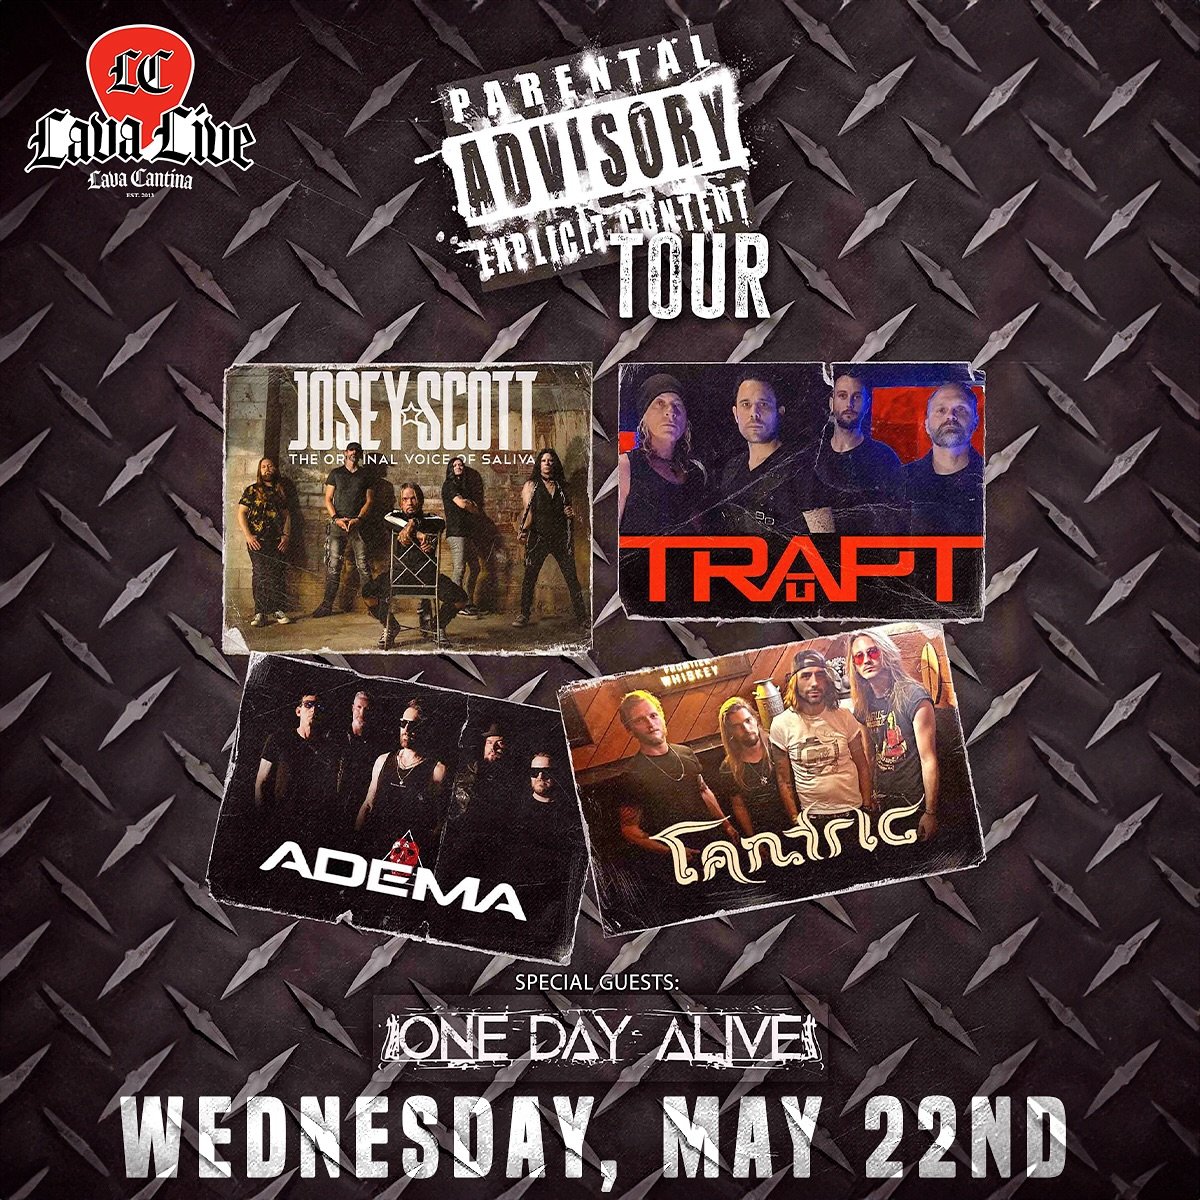 🔥Get ready to ROCK as the Parental Advisory Tour takes over @lavacantinatc with Josey Scott (The Original Voice of Saliva), Trapt, Adema, Tantric, &amp; One Day Alive on Wednesday, May 22nd starting at 7PM!🔥

🎟️🎟️➡️ LavaCantina.com

👀General Adm